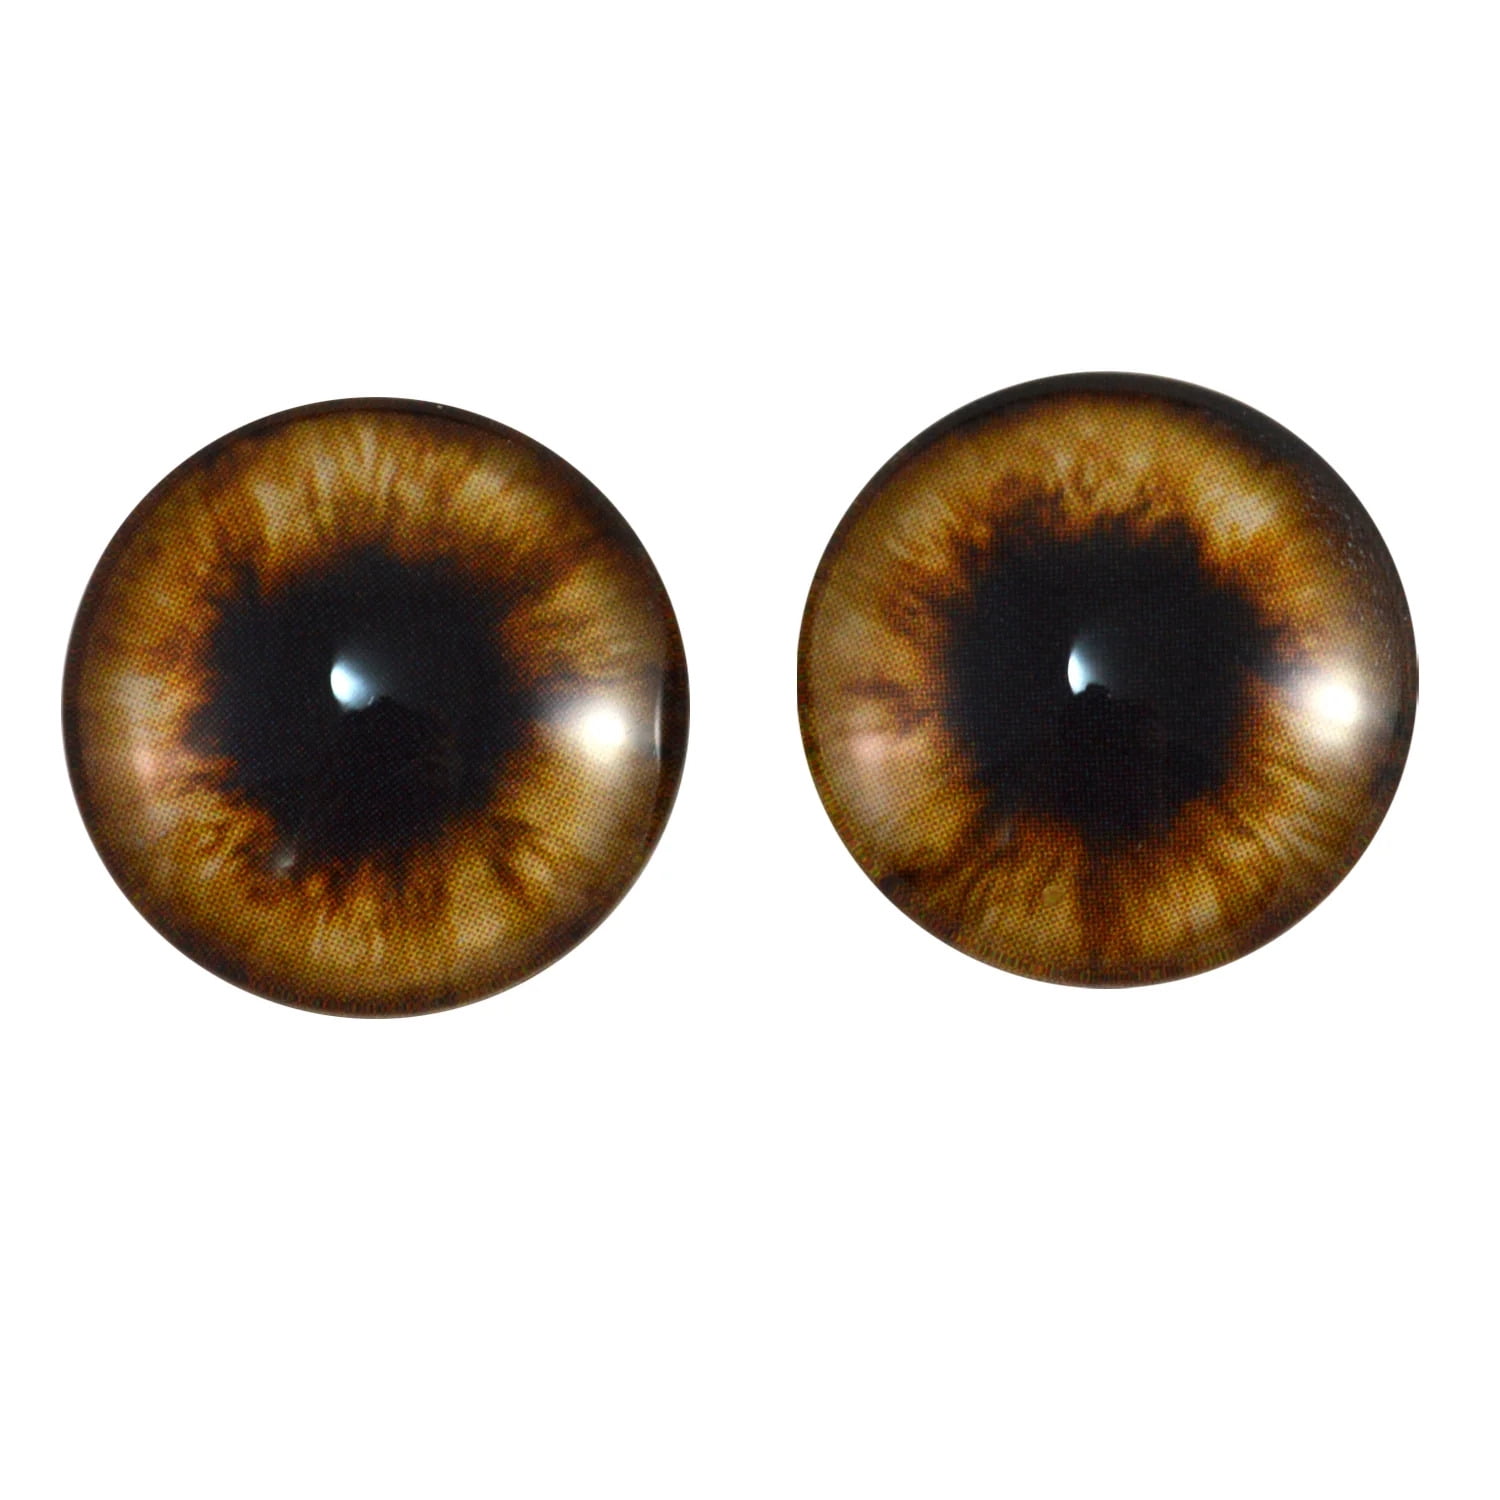  14mm Pair of Brown Teddy Bear Glass Eyes for Jewelry